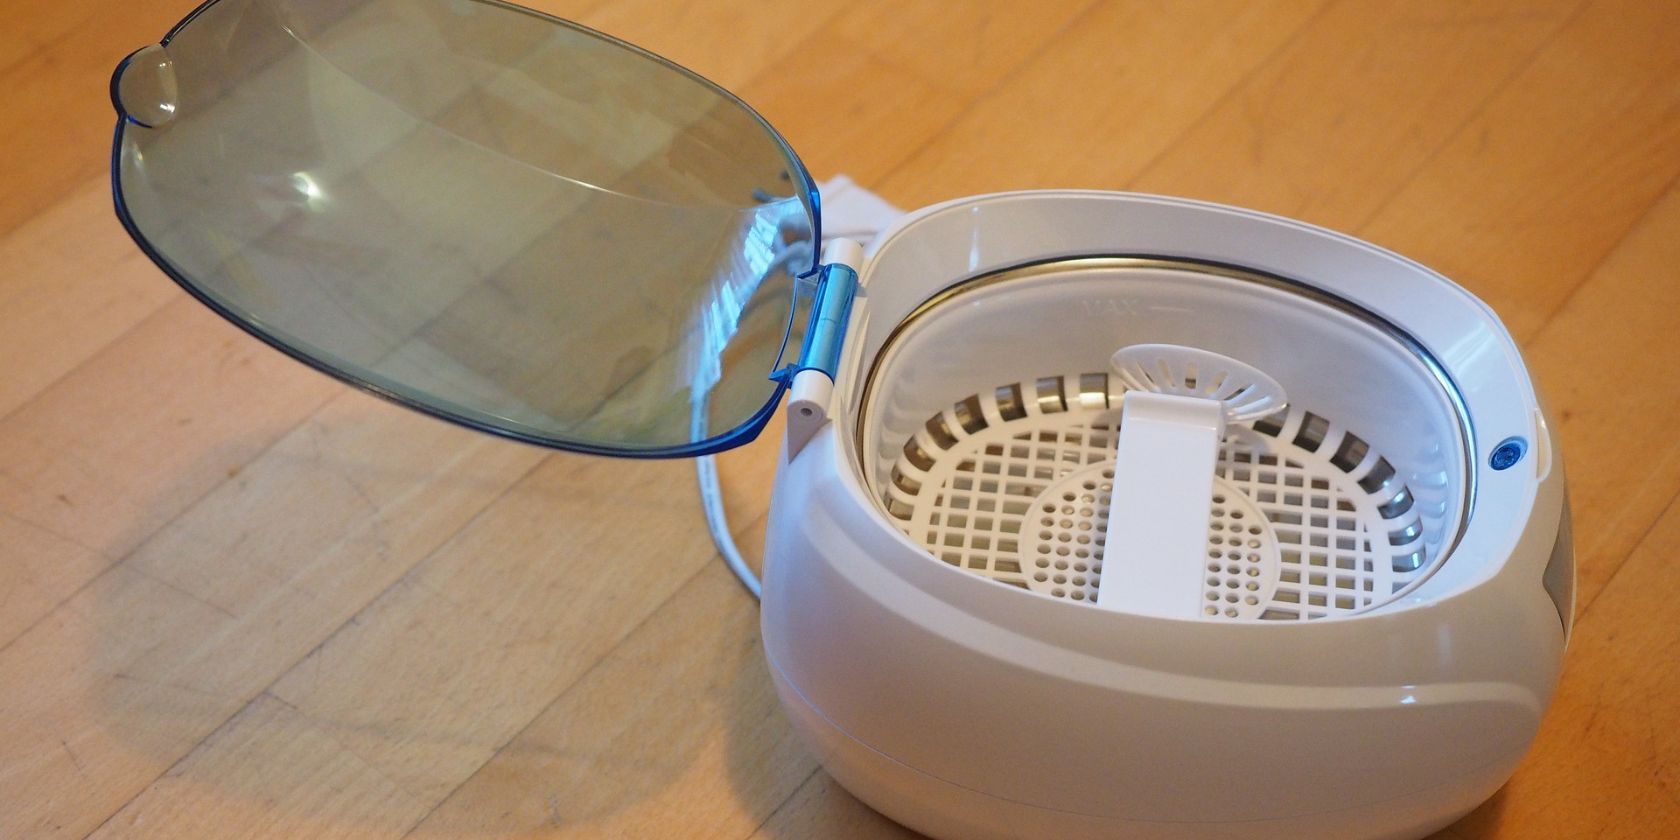 ultrasonic cleaner on table